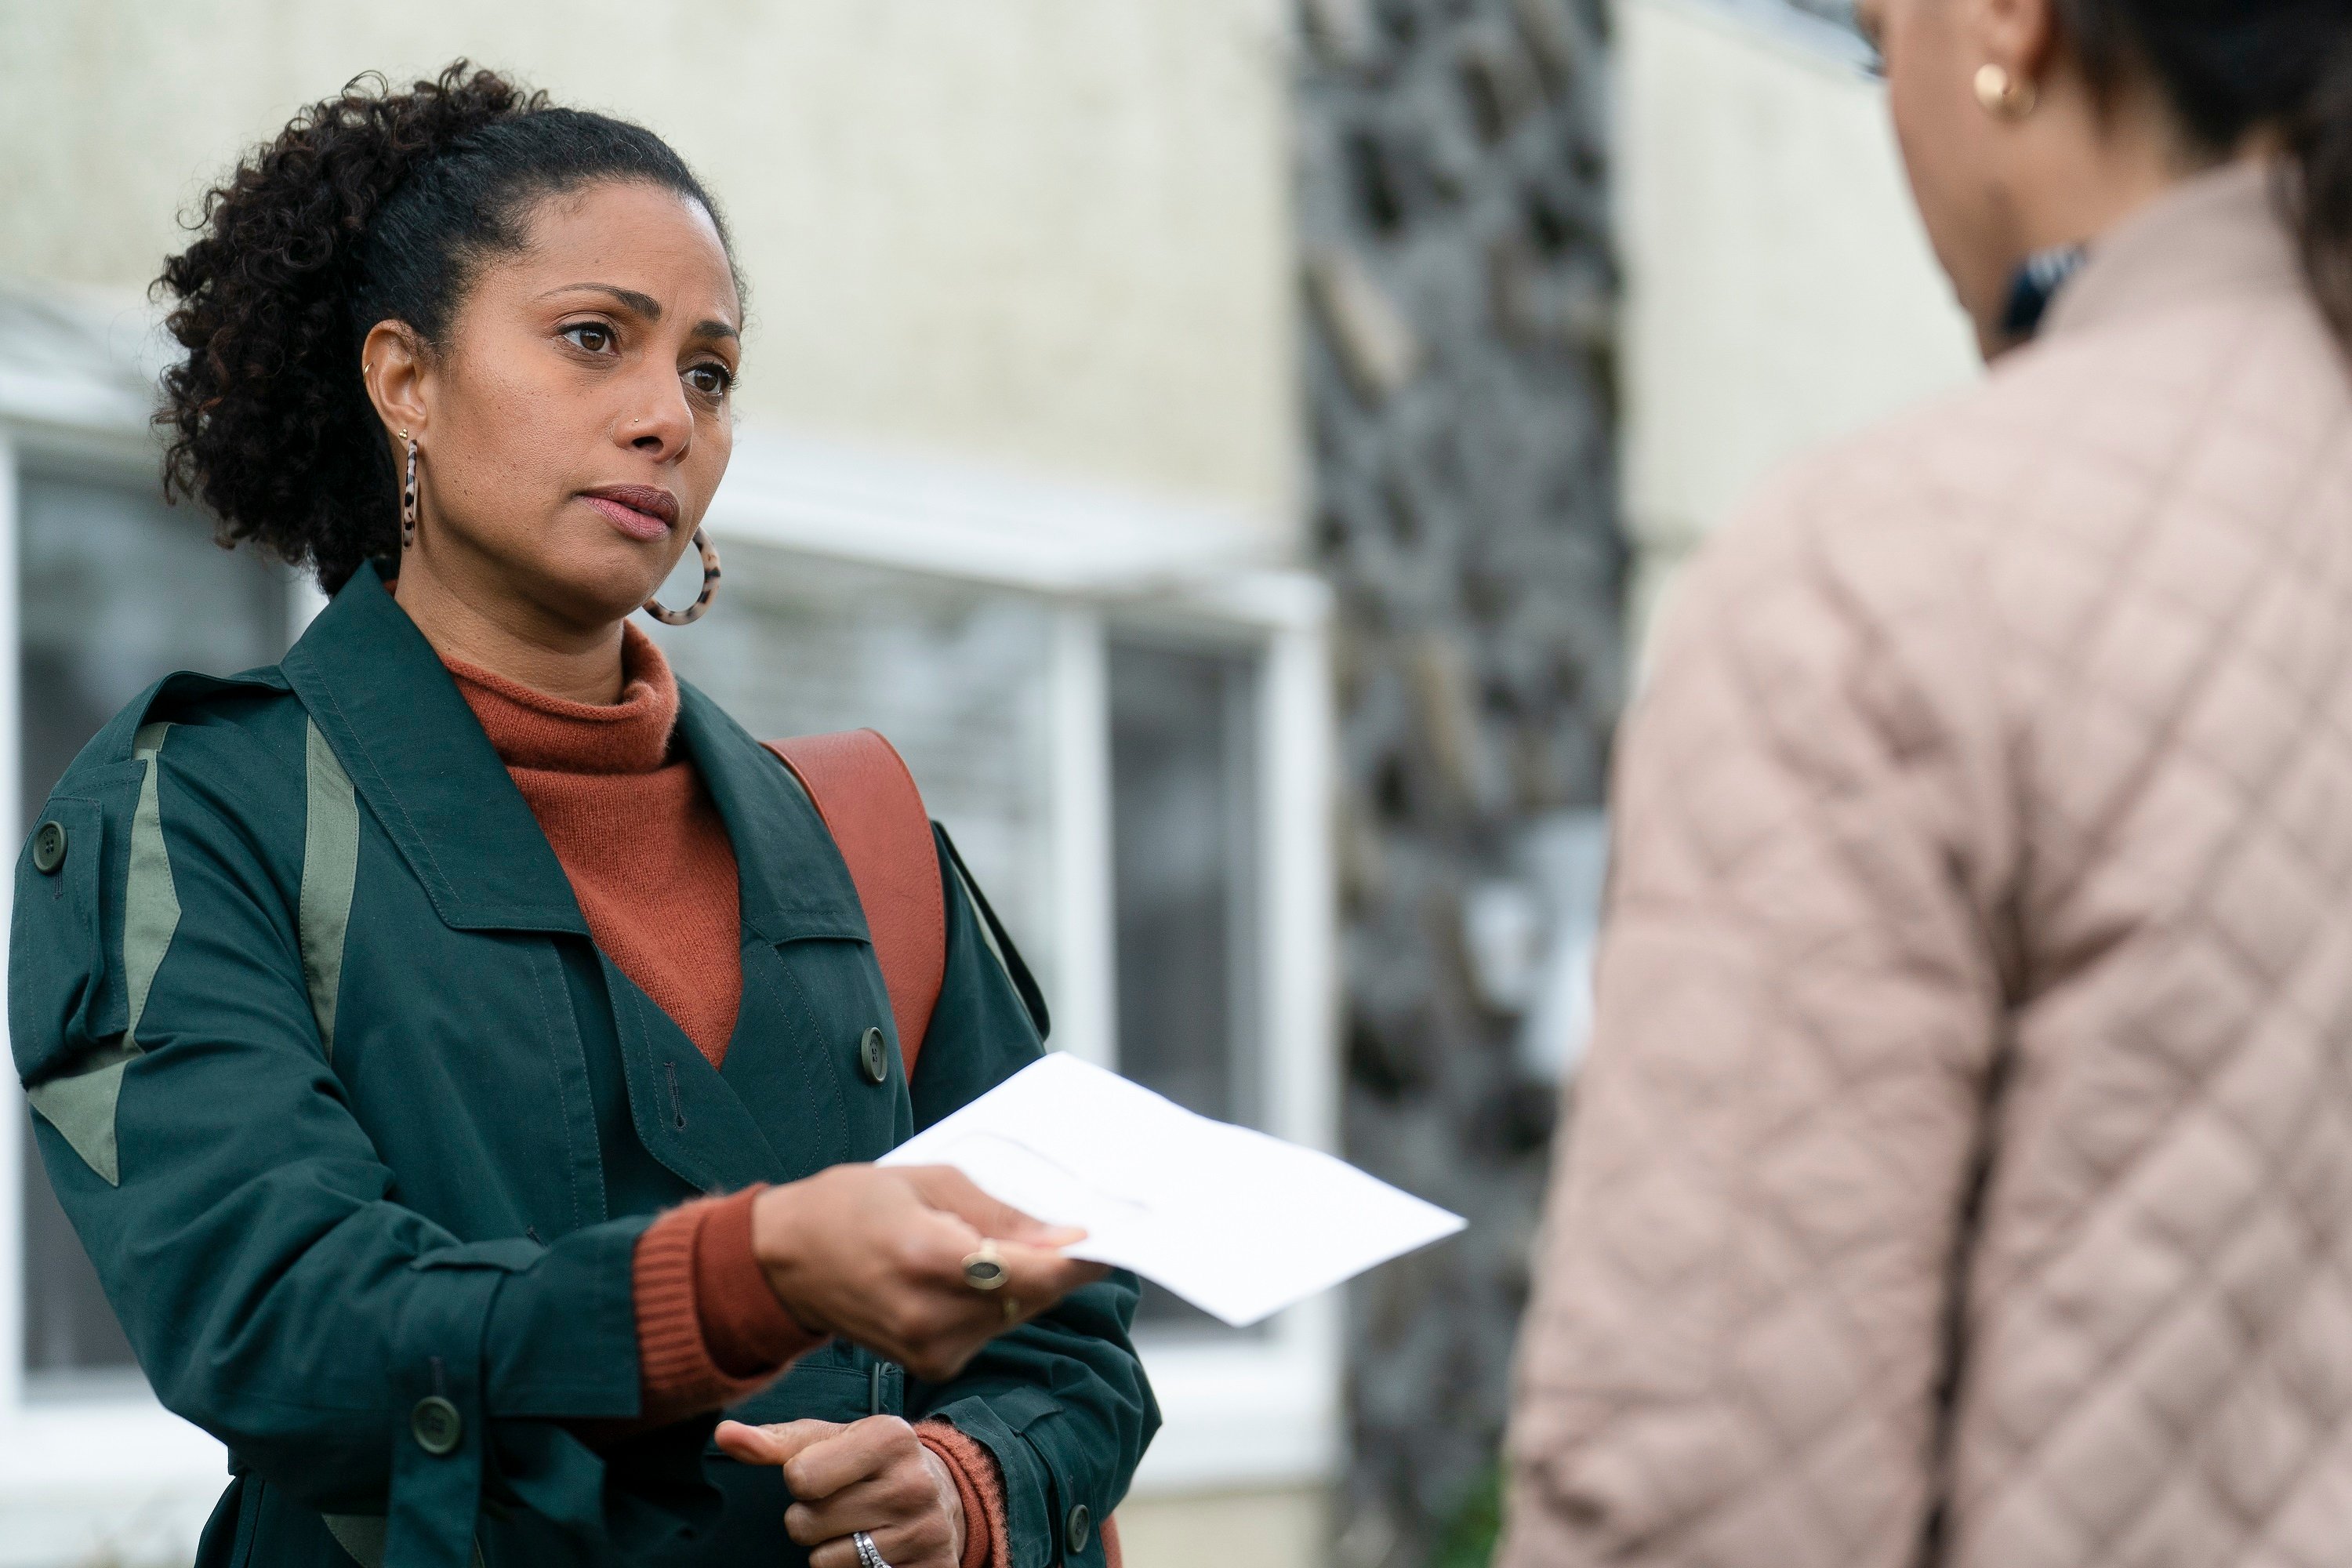 'A Million Little Things' Season 4 Episode 9 Christina Moses holds an envelope in her hand as Regina Howard